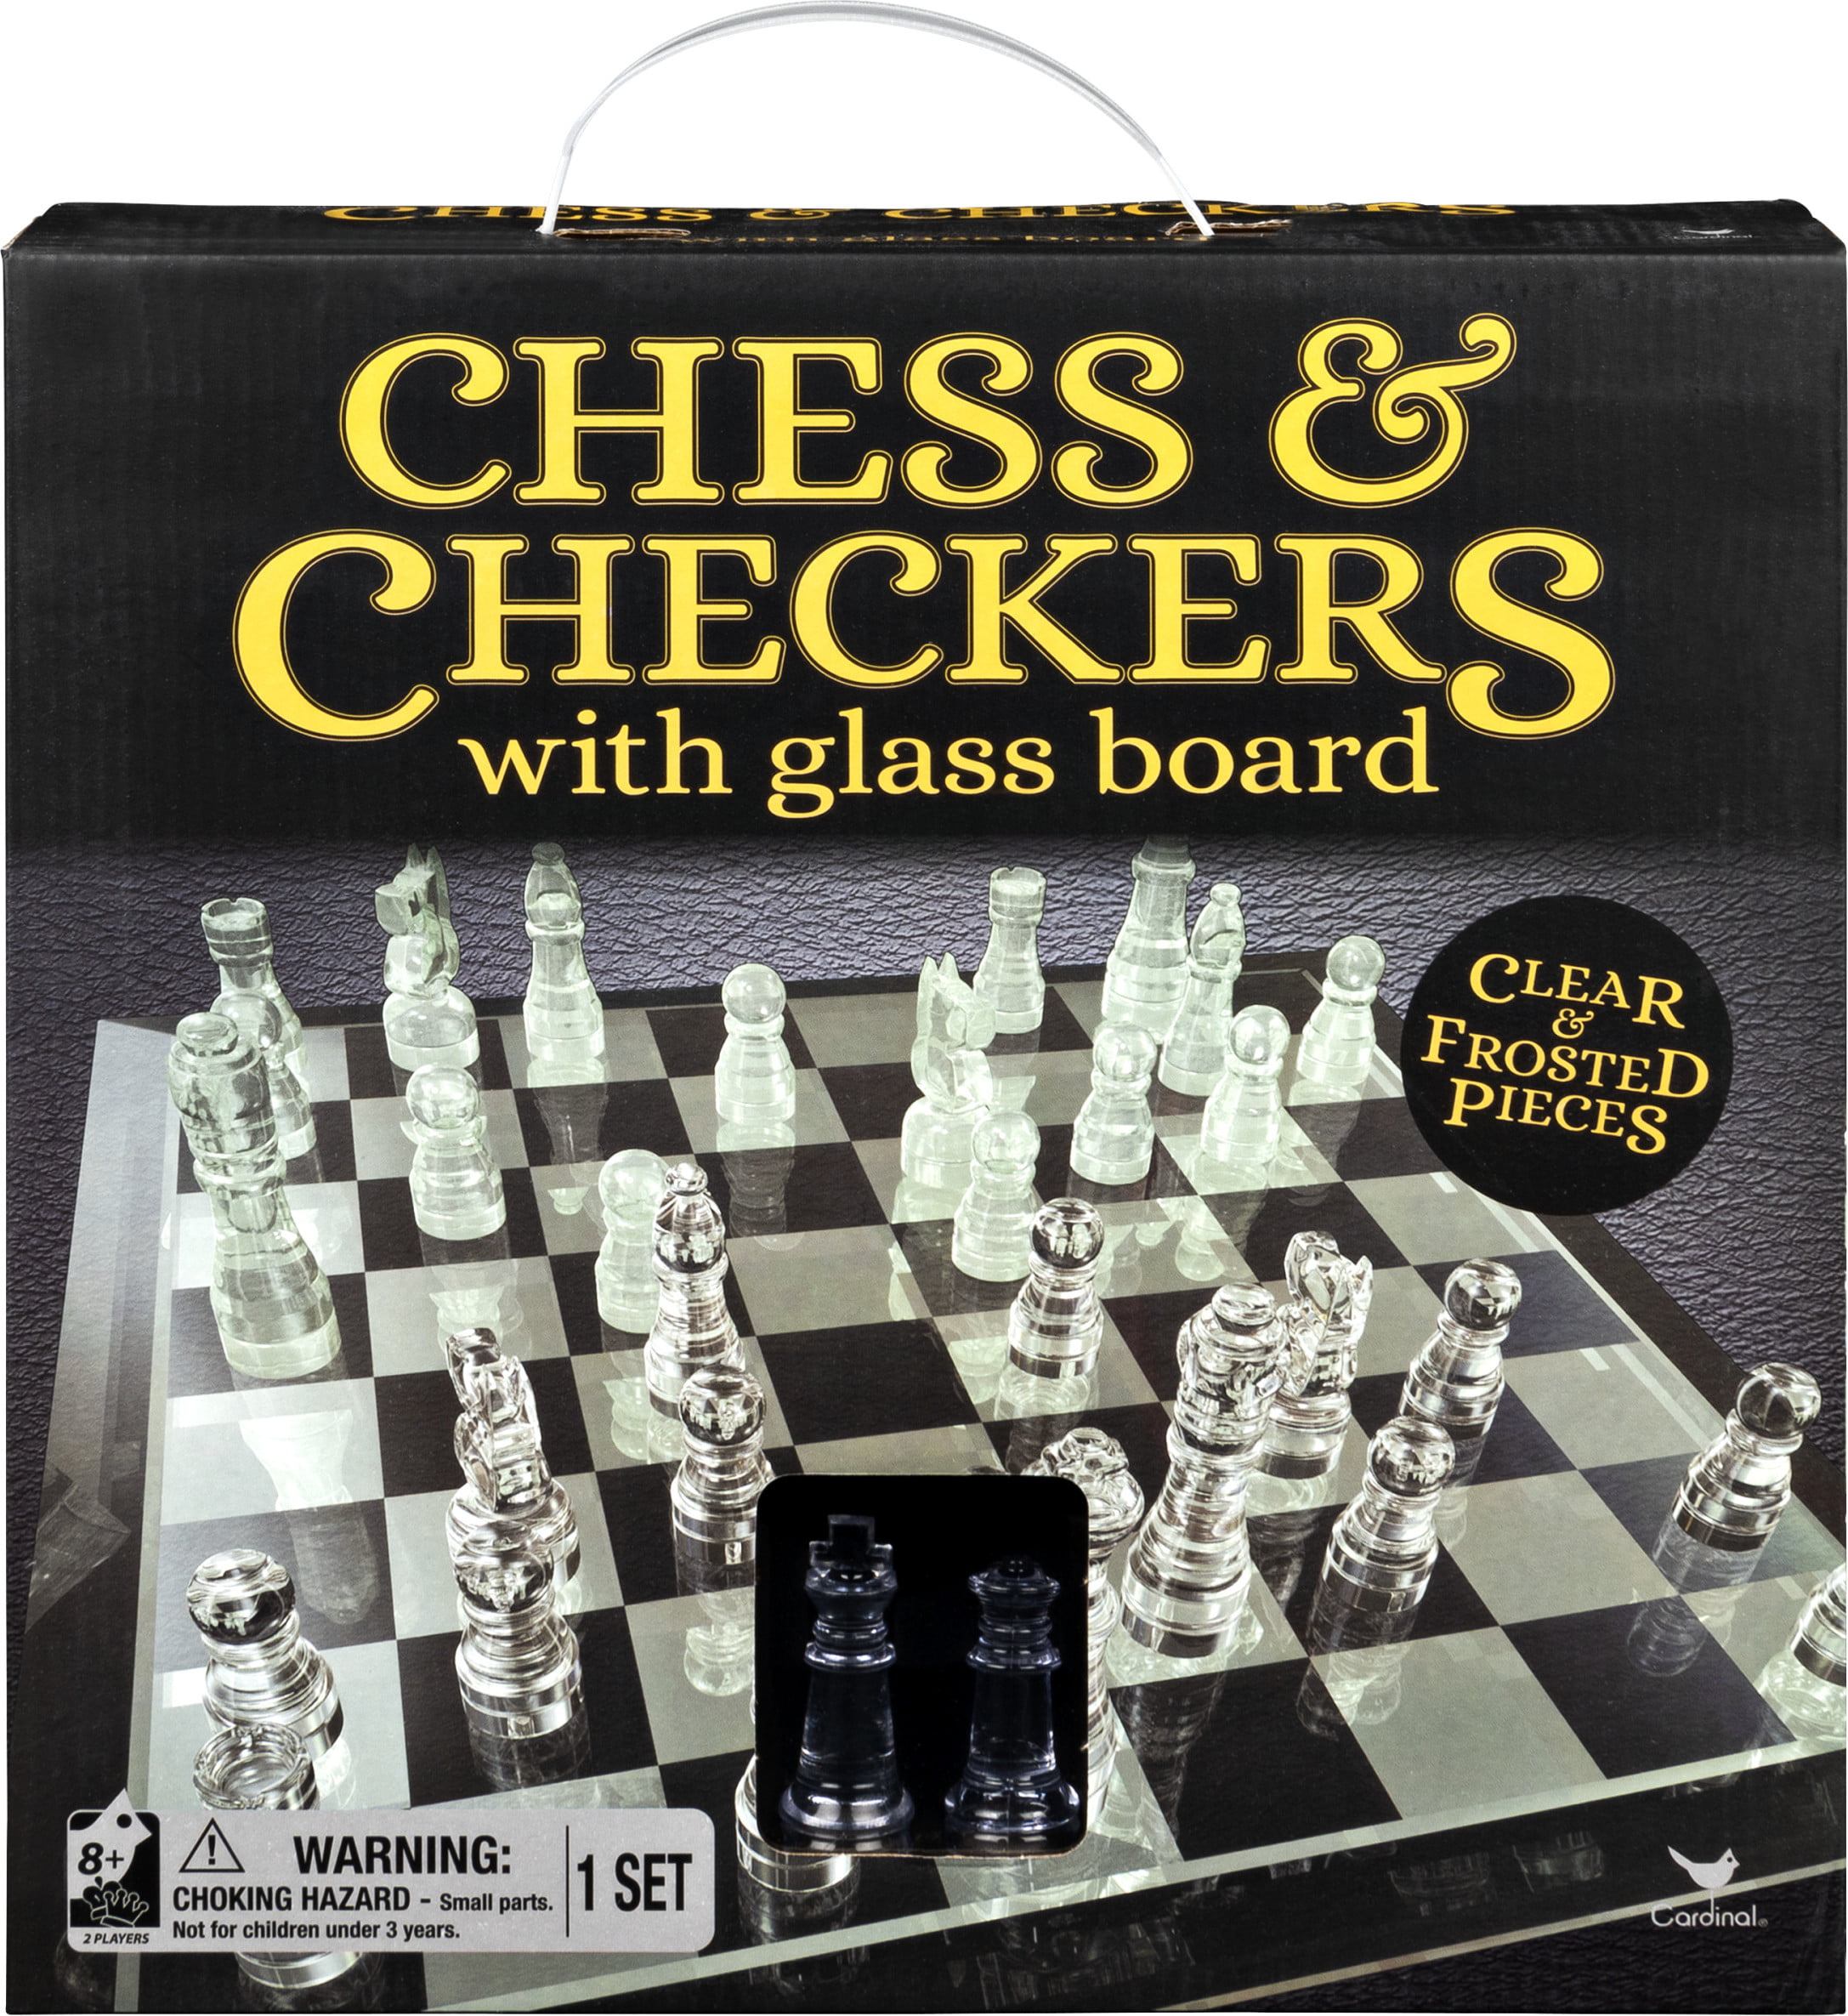 Glass Chess Set Elegant Pieces and Checker Board Game C Black V1W1 Frosted Q4M8 